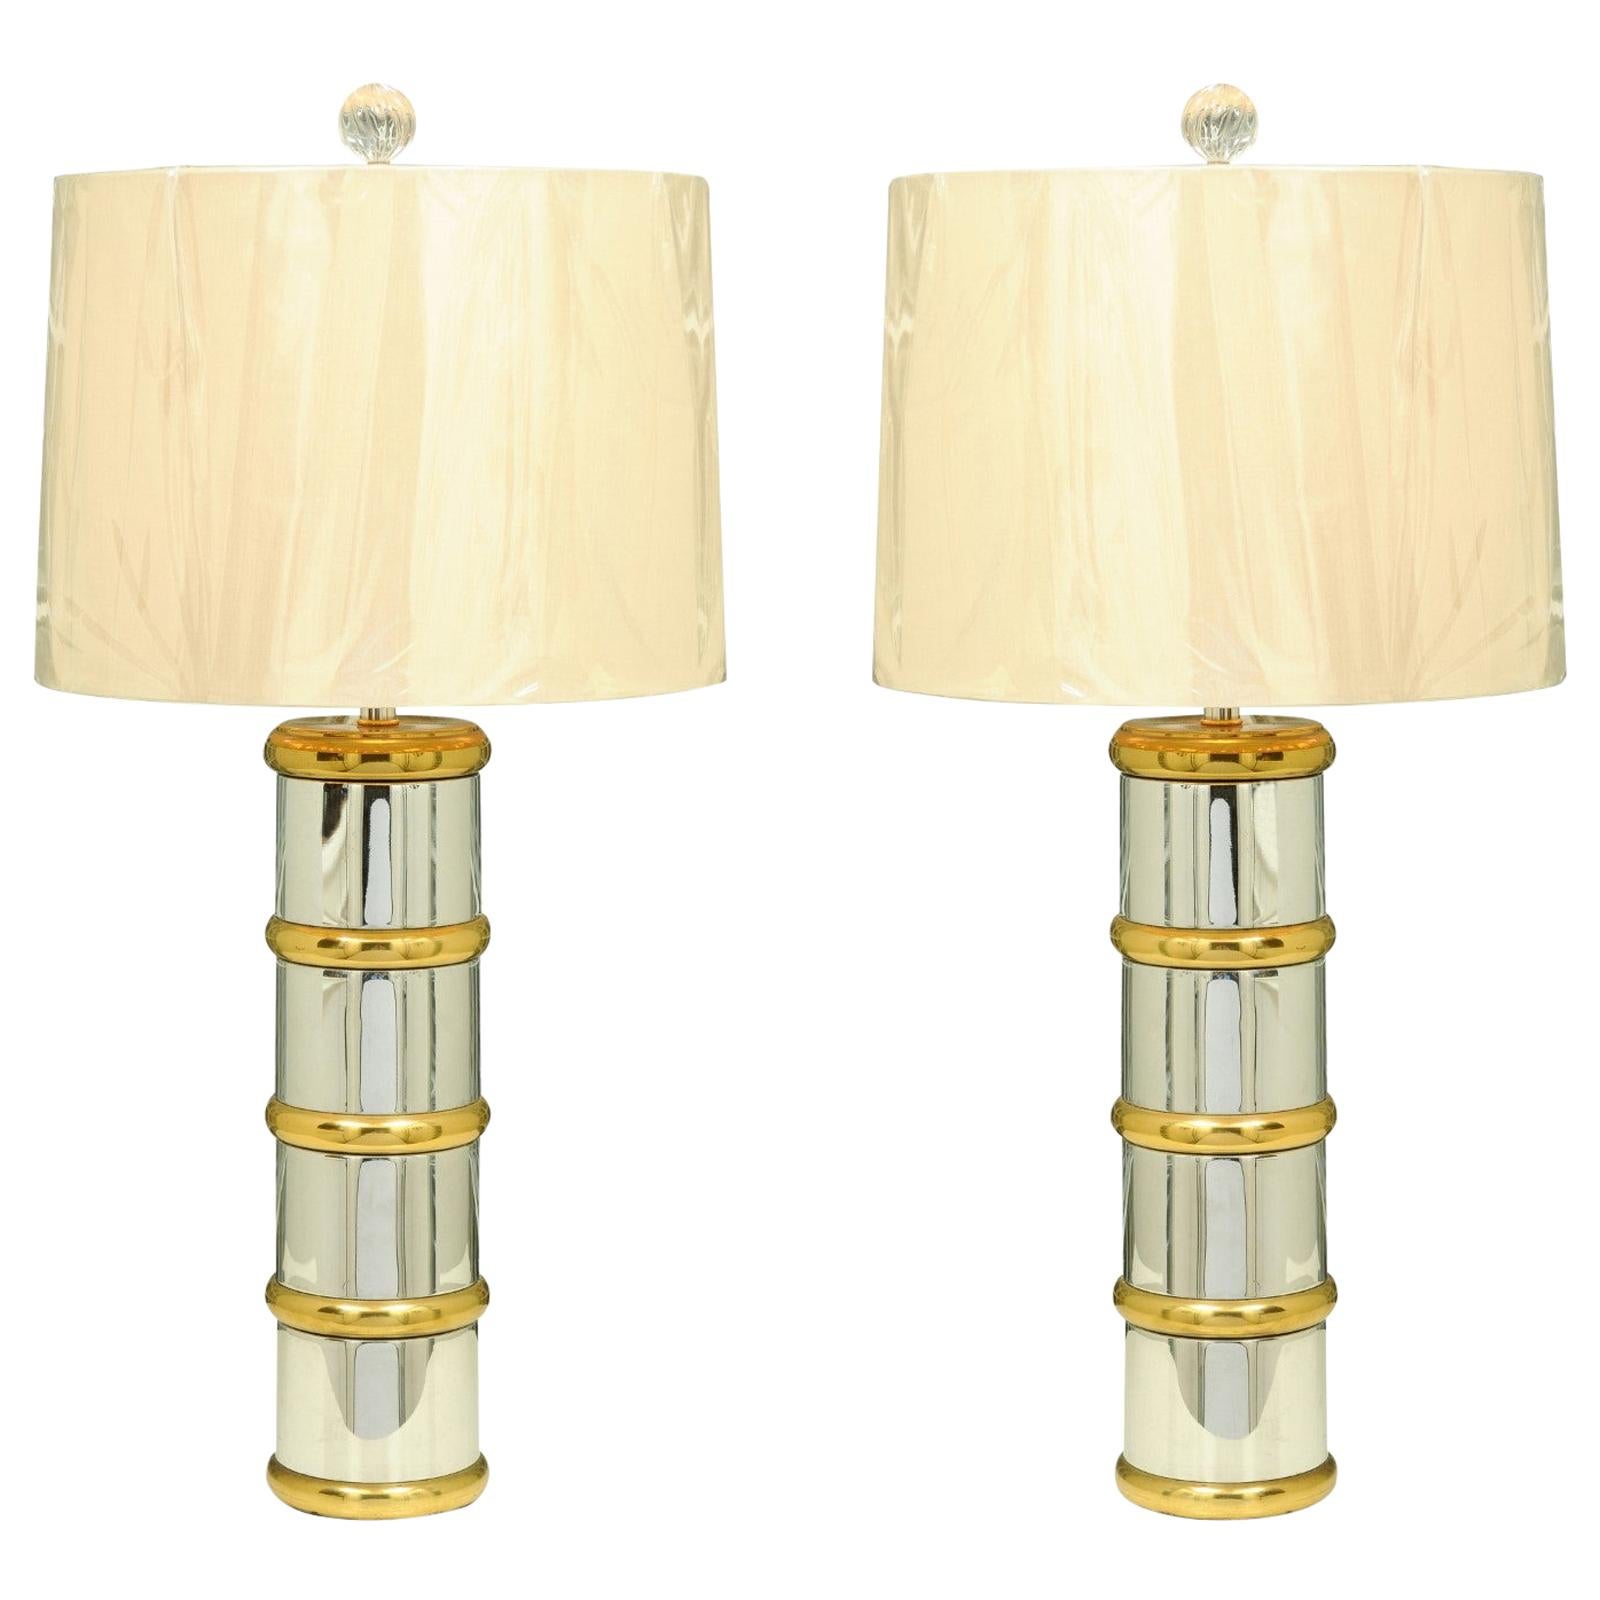 Stunning Pair of Faux-Bamboo Lamps in Chrome and Brass, Italy, circa 1970 For Sale